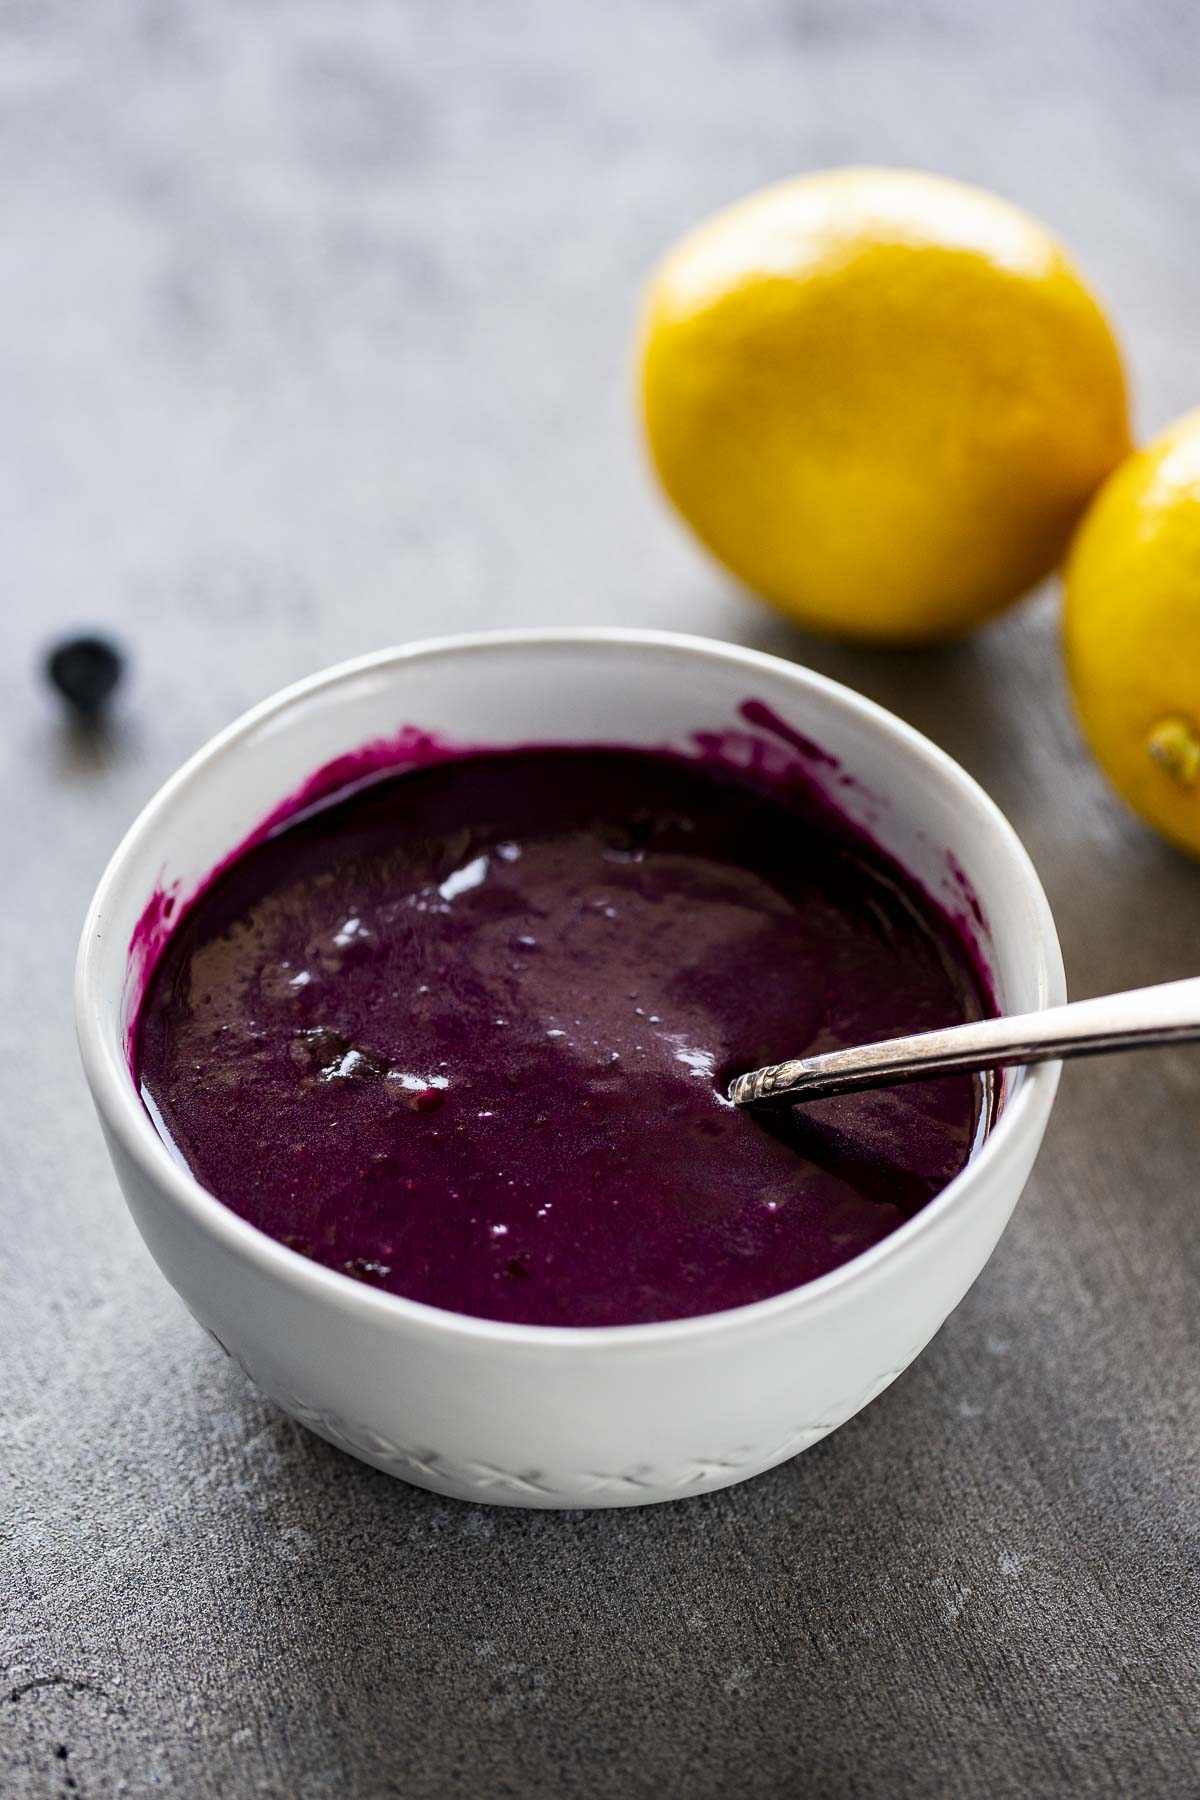 Blueberry curd in a white bowl with lemons in background.